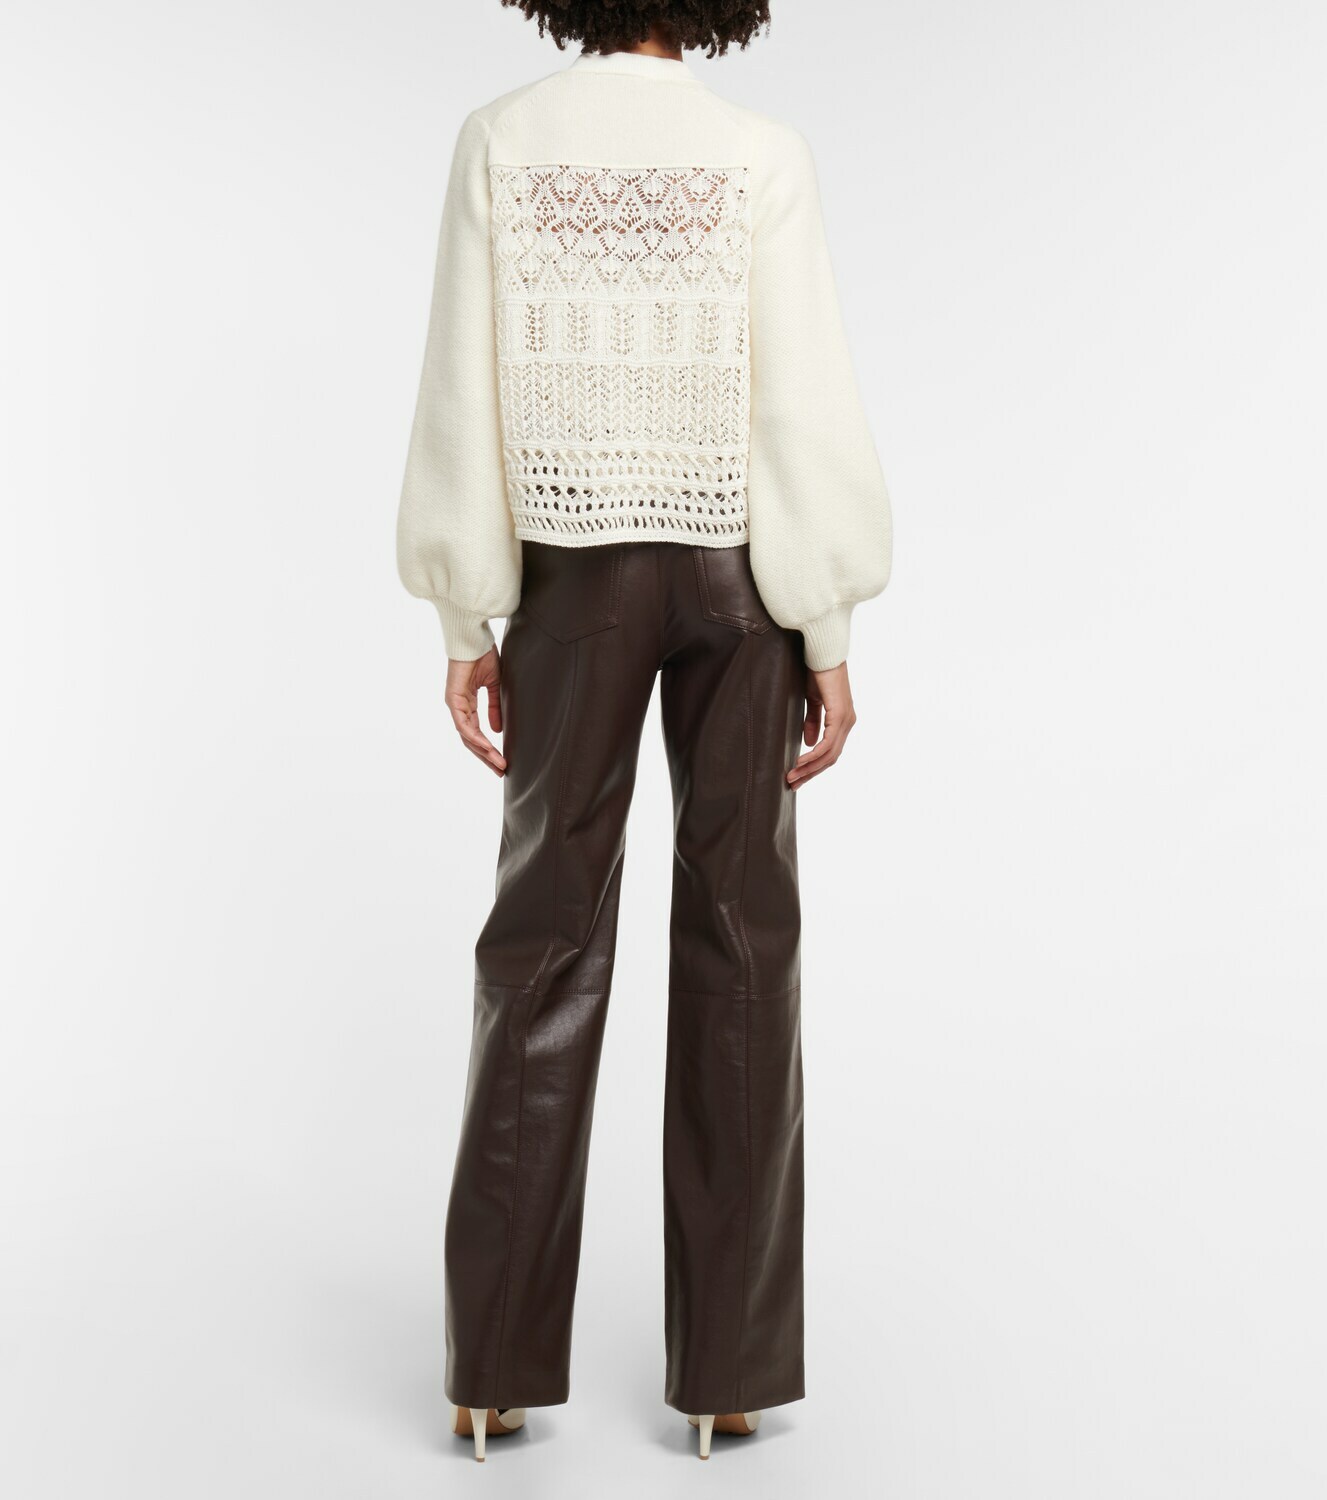 Dorothee Schumacher - Wool and cashmere cardigan and camisole set ...